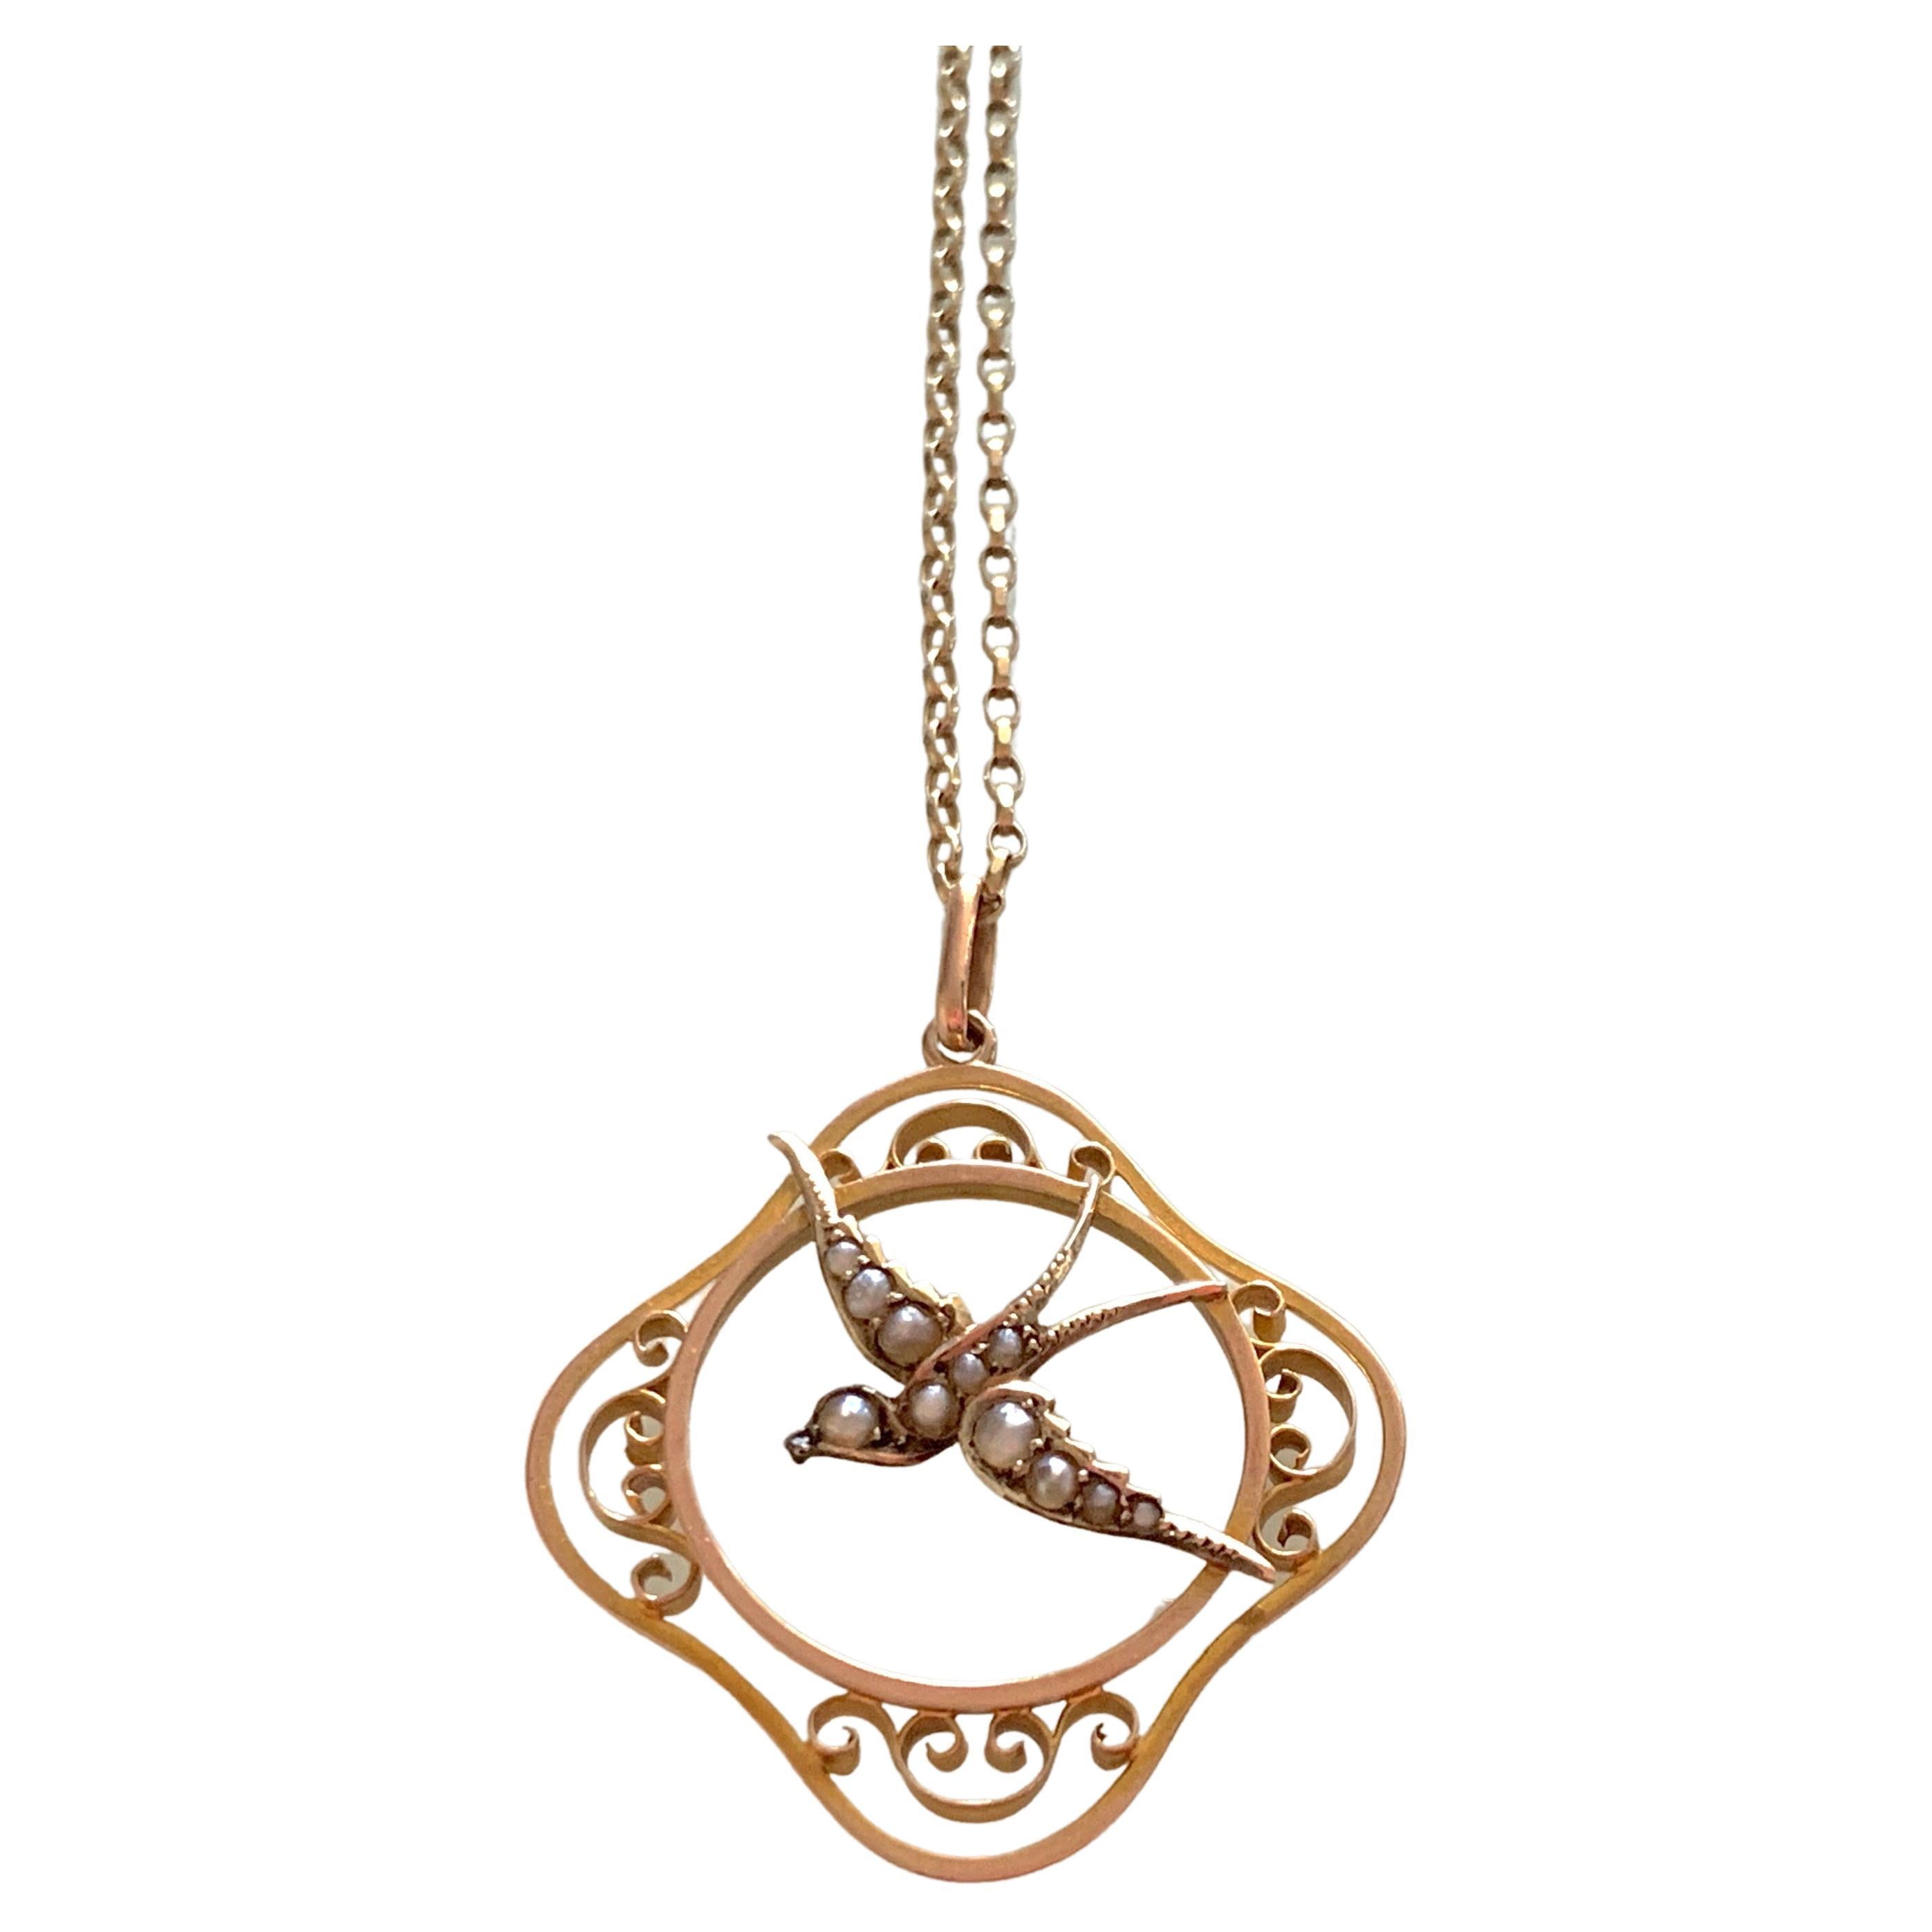 9 Carat Gold antique Pendant with 9 Carat Gold Modern Chain